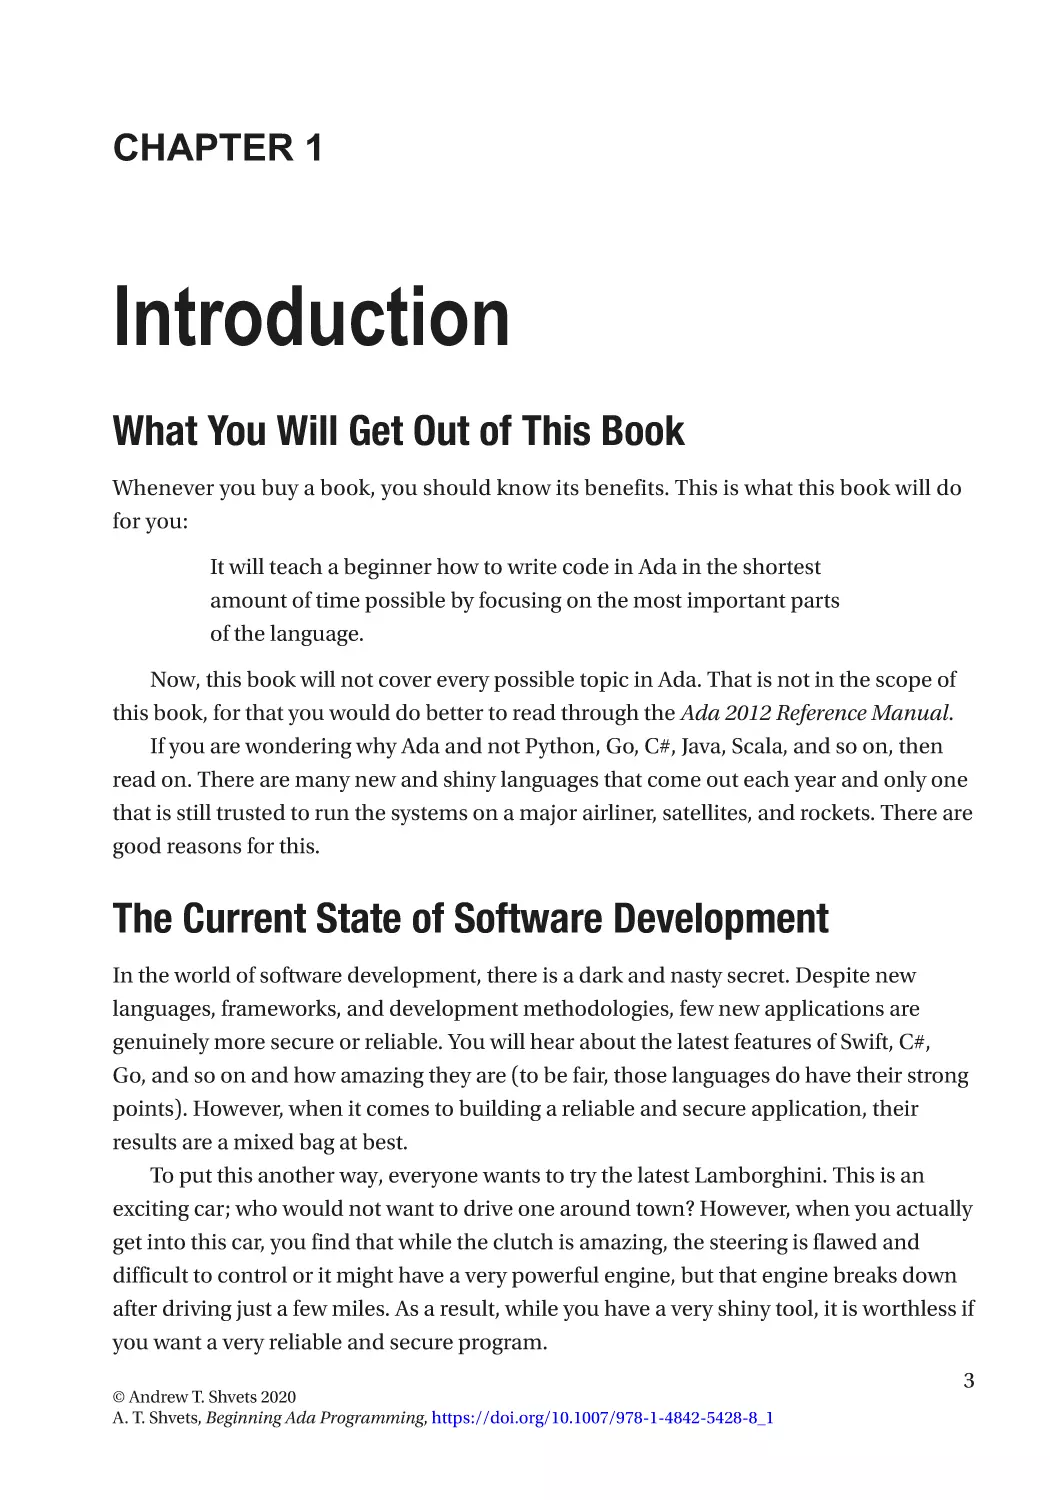 Chapter 1
What You Will Get Out of This Book
The Current State of Software Development